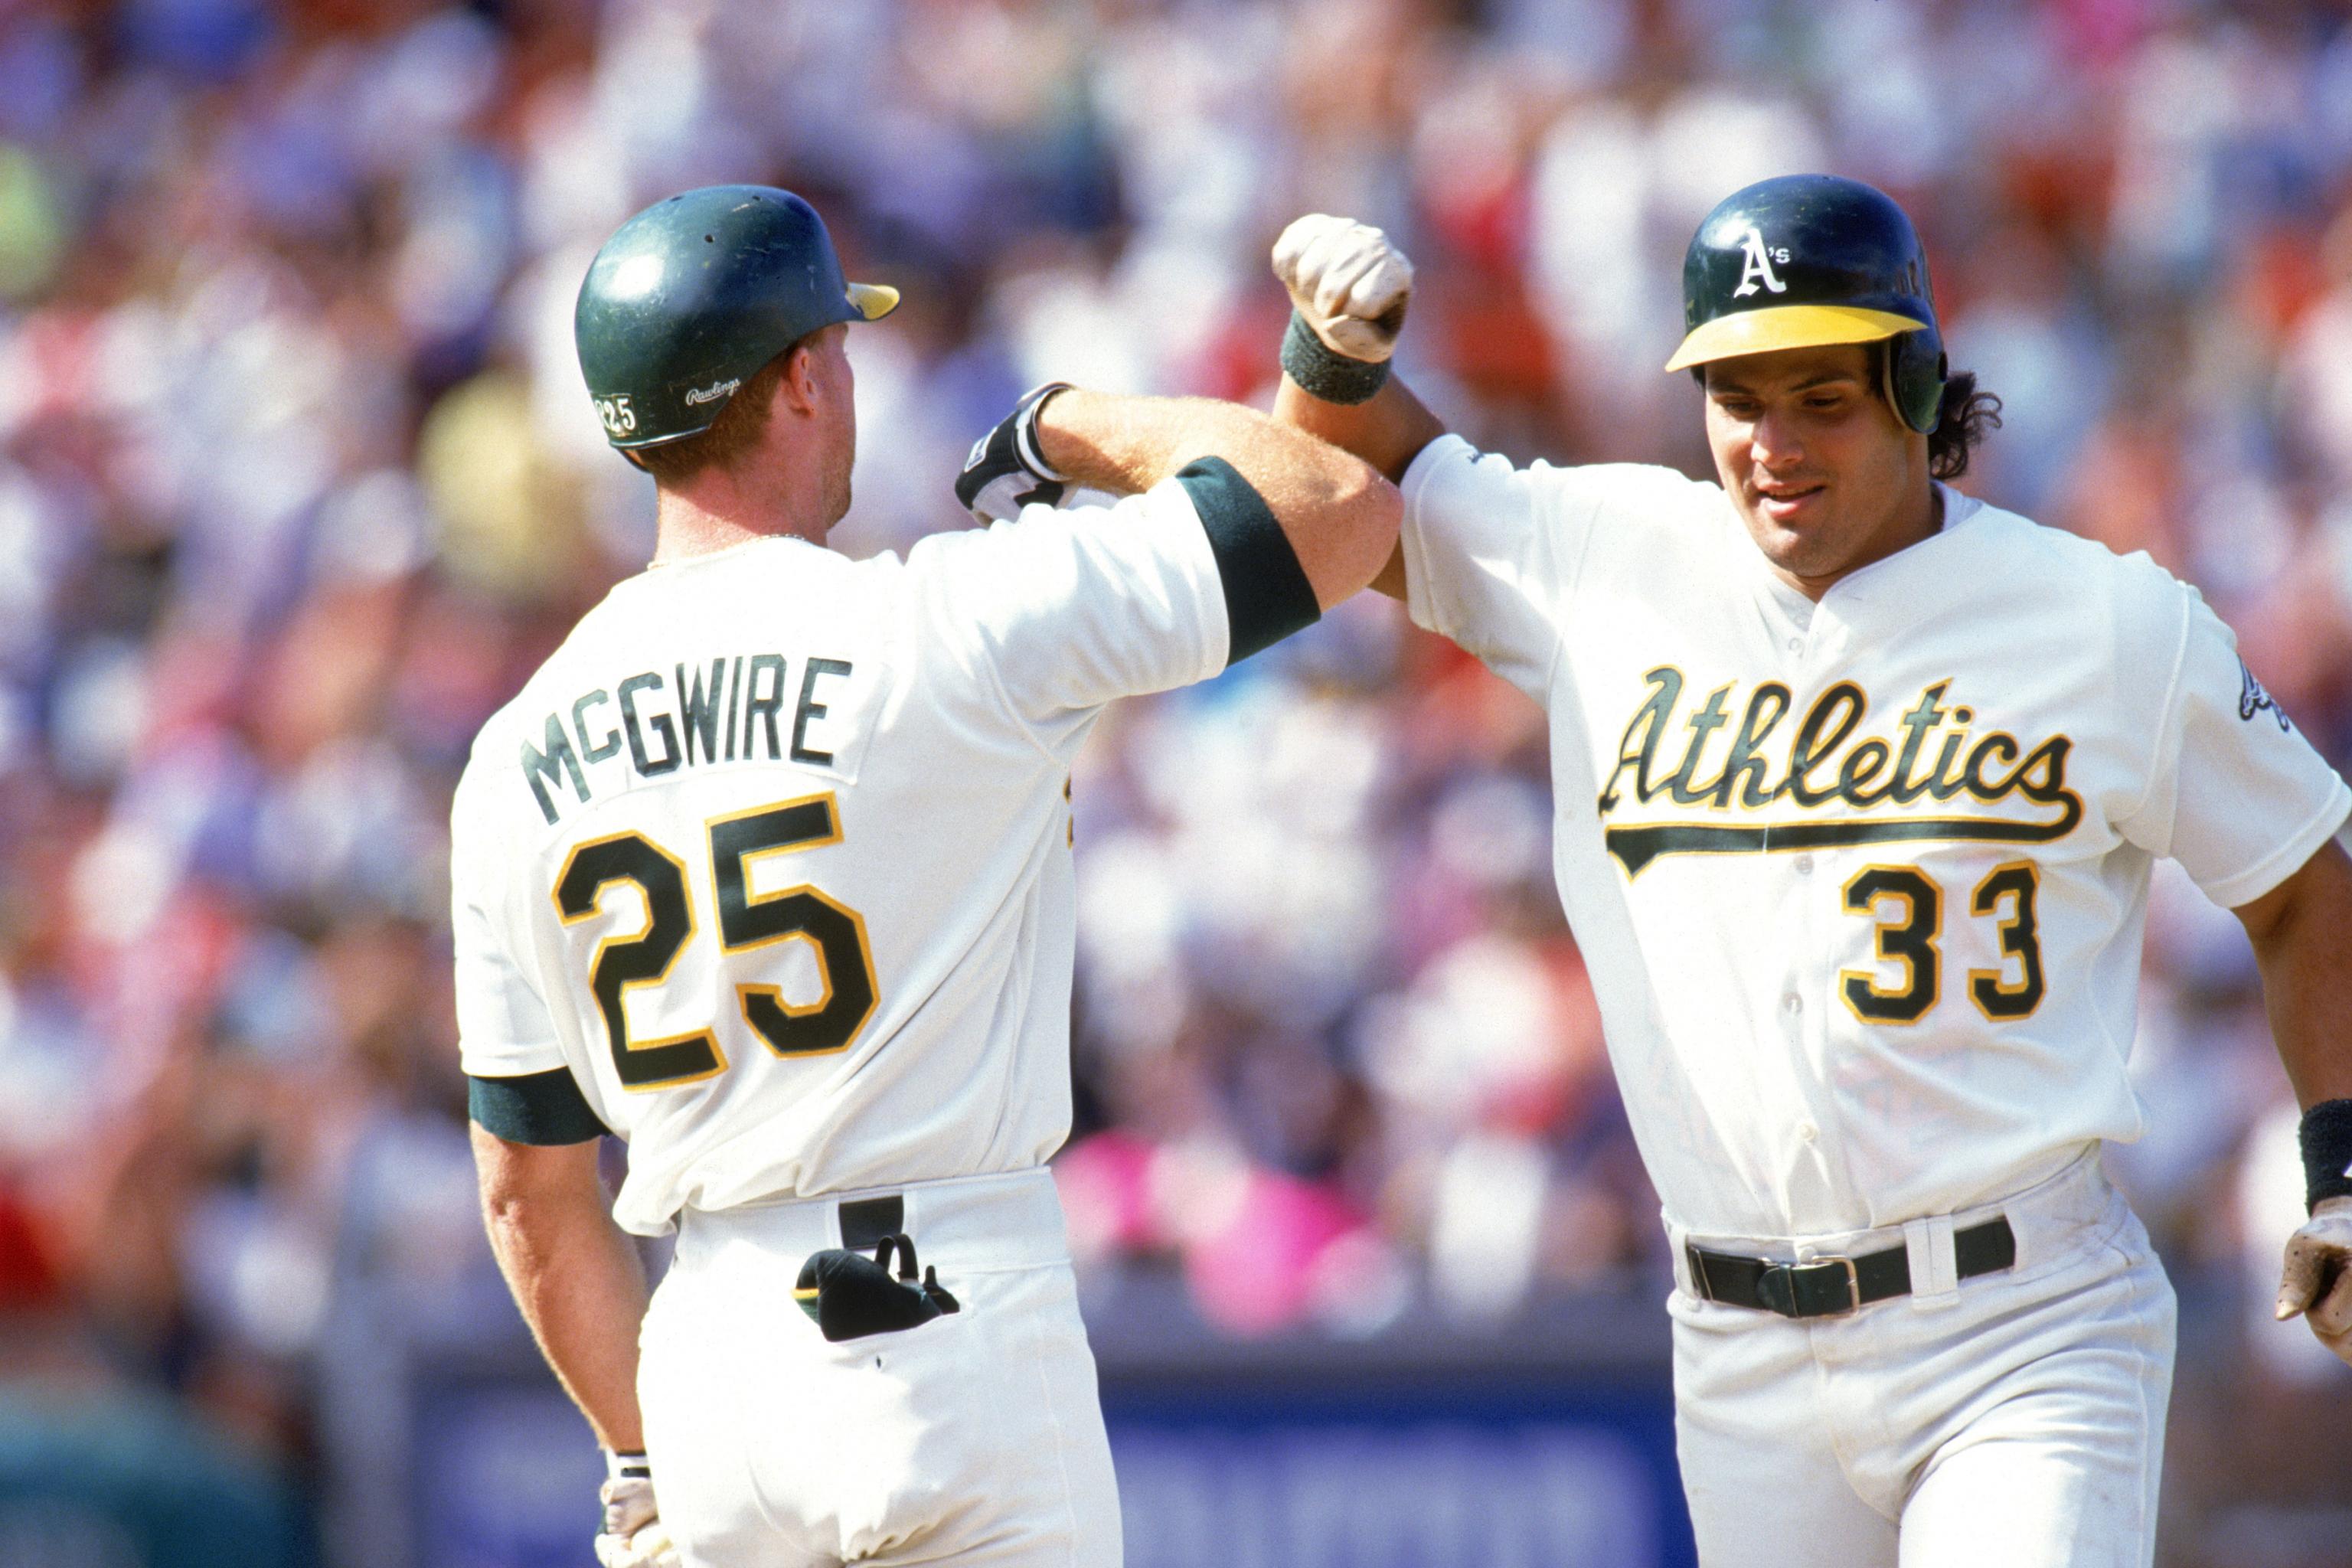 Former Oakland A's Bash Brother Jose Canseco had one of the most